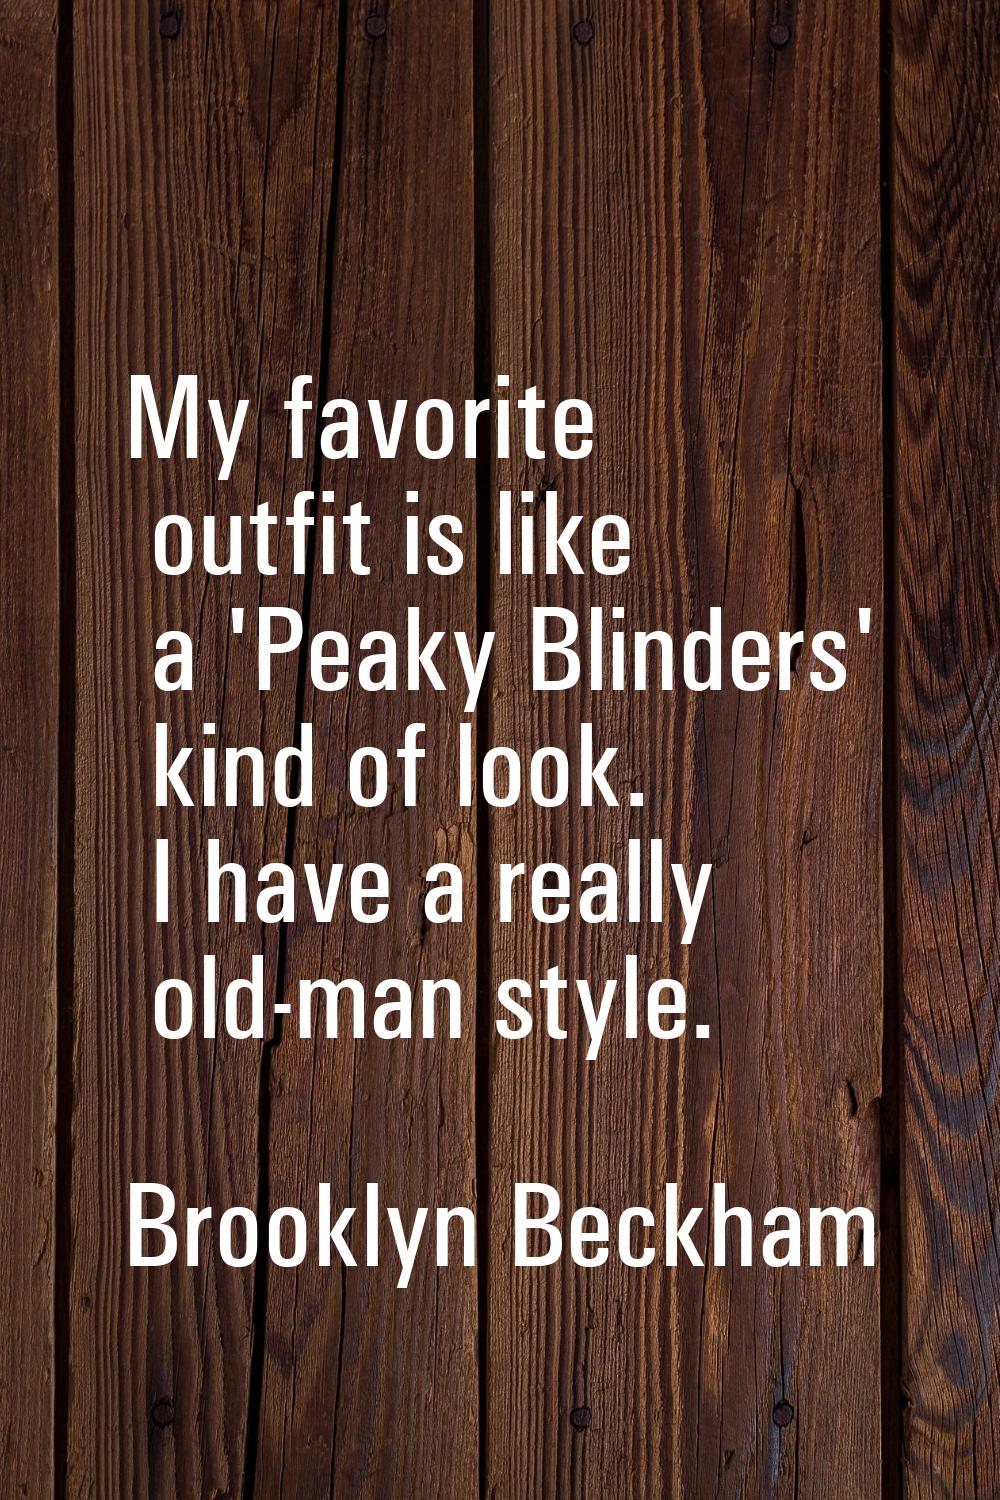 My favorite outfit is like a 'Peaky Blinders' kind of look. I have a really old-man style.